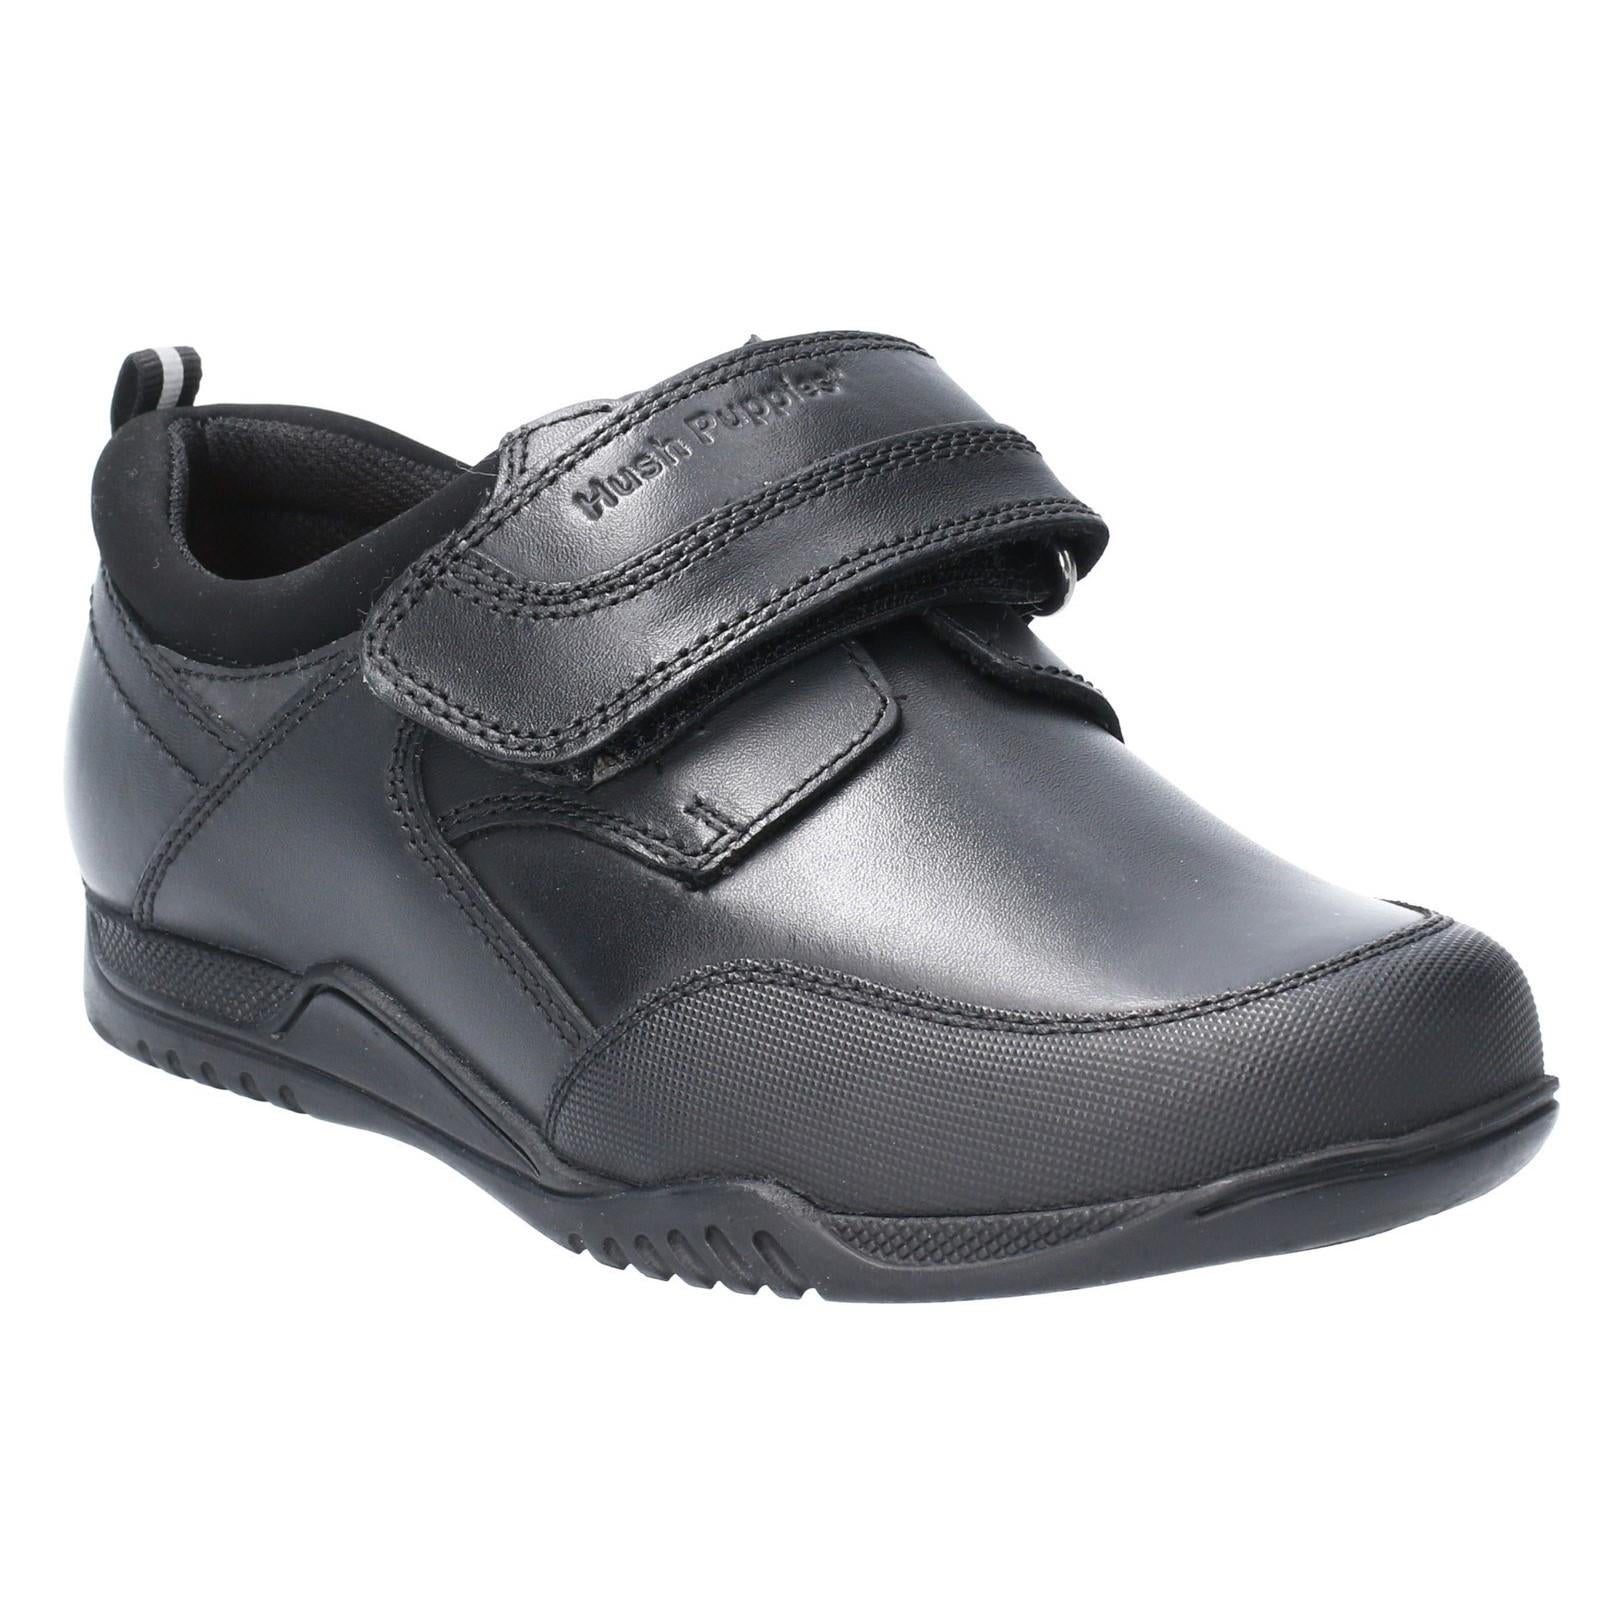 Hush Puppies Noah junior black smooth leather touch fastening shoe